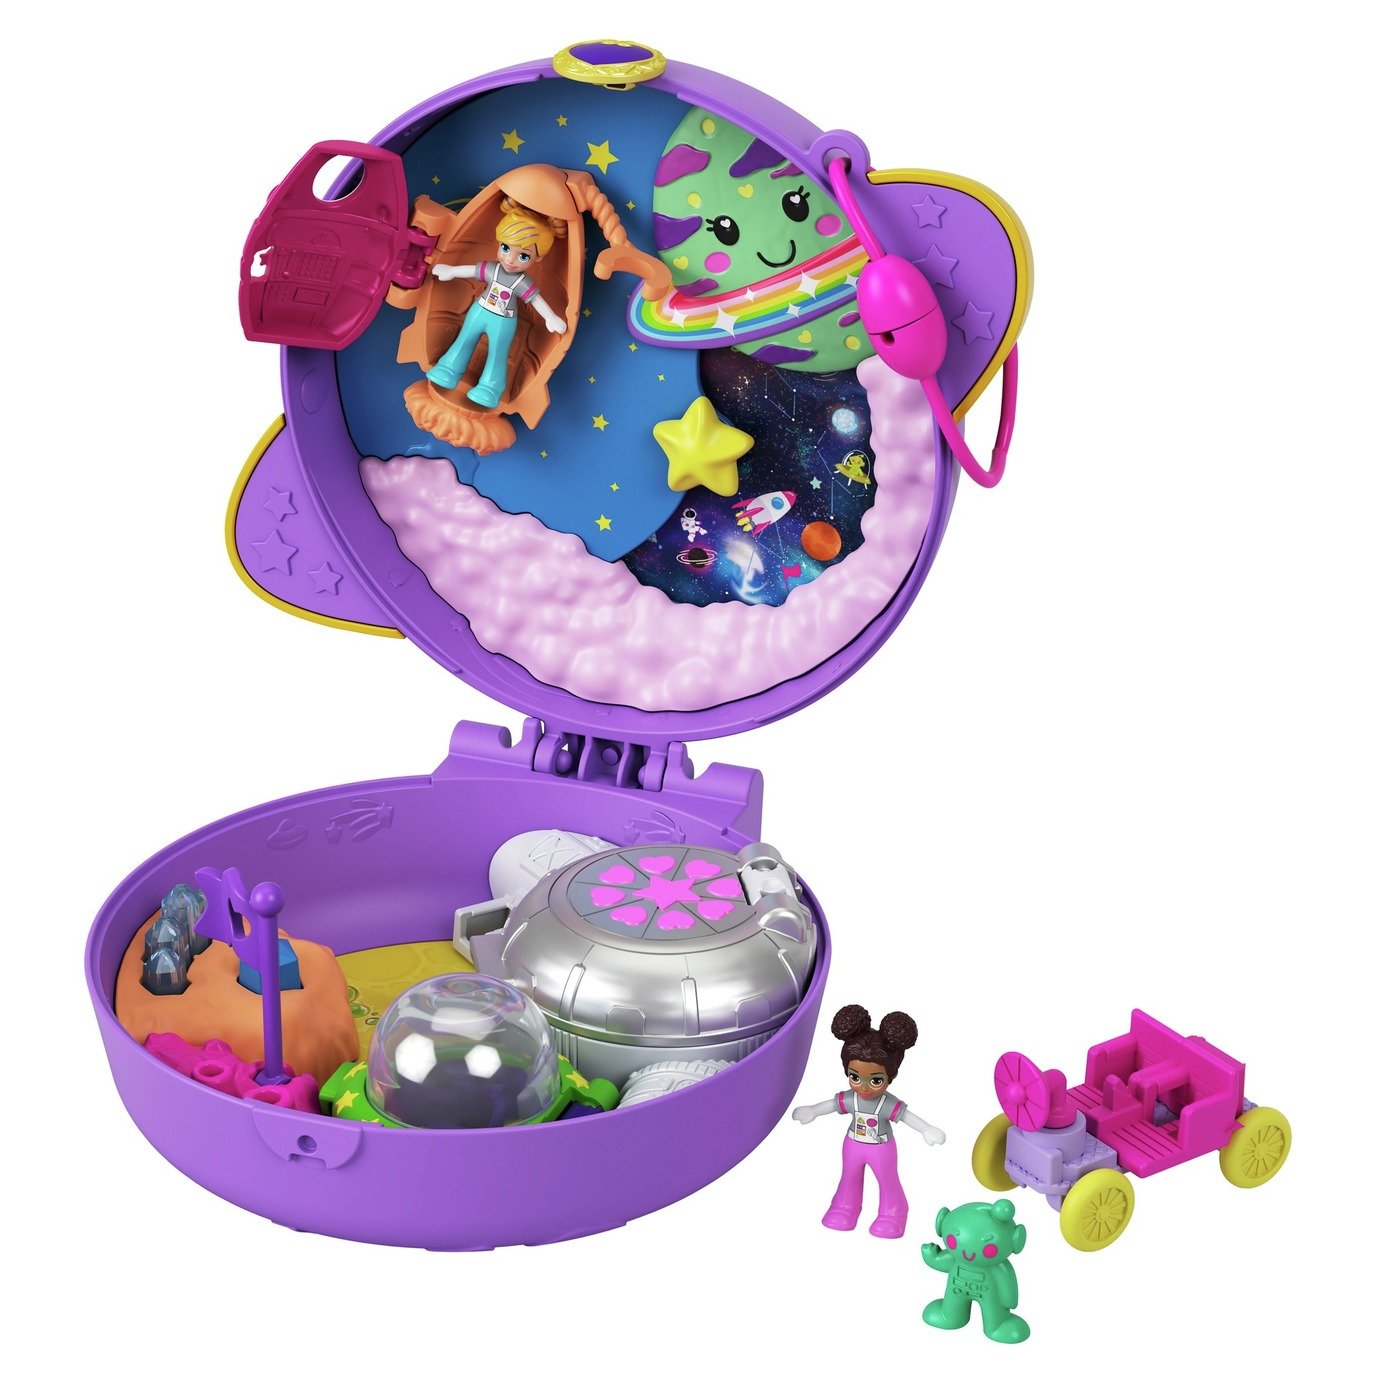 Polly Pocket Pocket World Saturn Space Compact Review